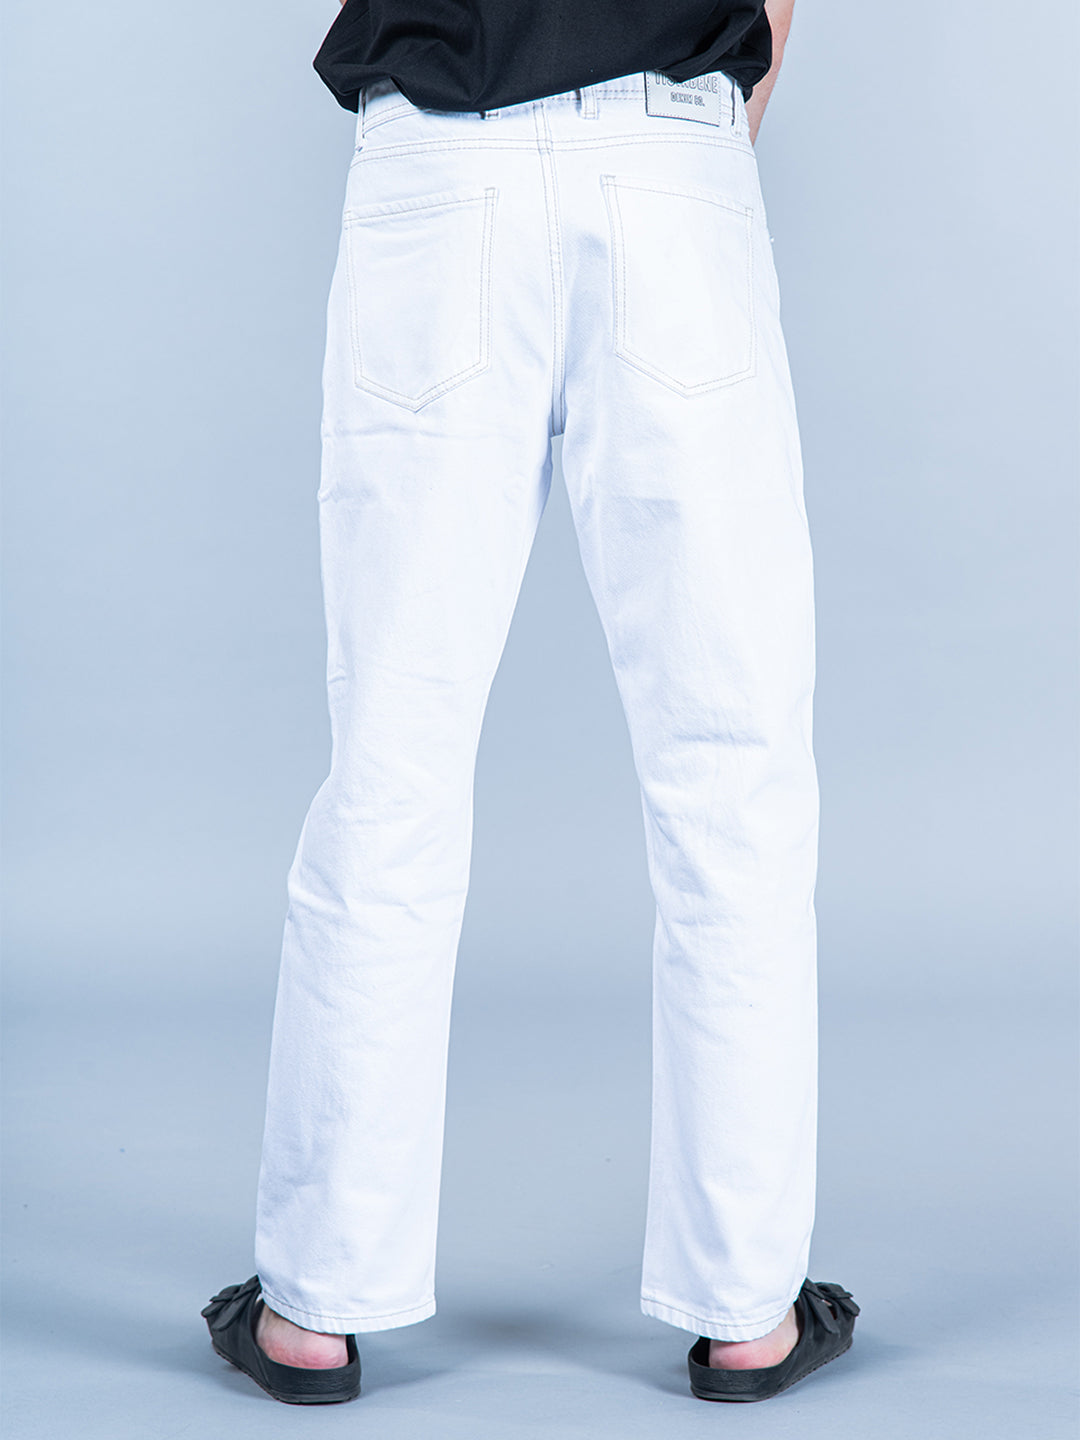 Men White Skinny Fit Stretchable Jeans - Kengvo